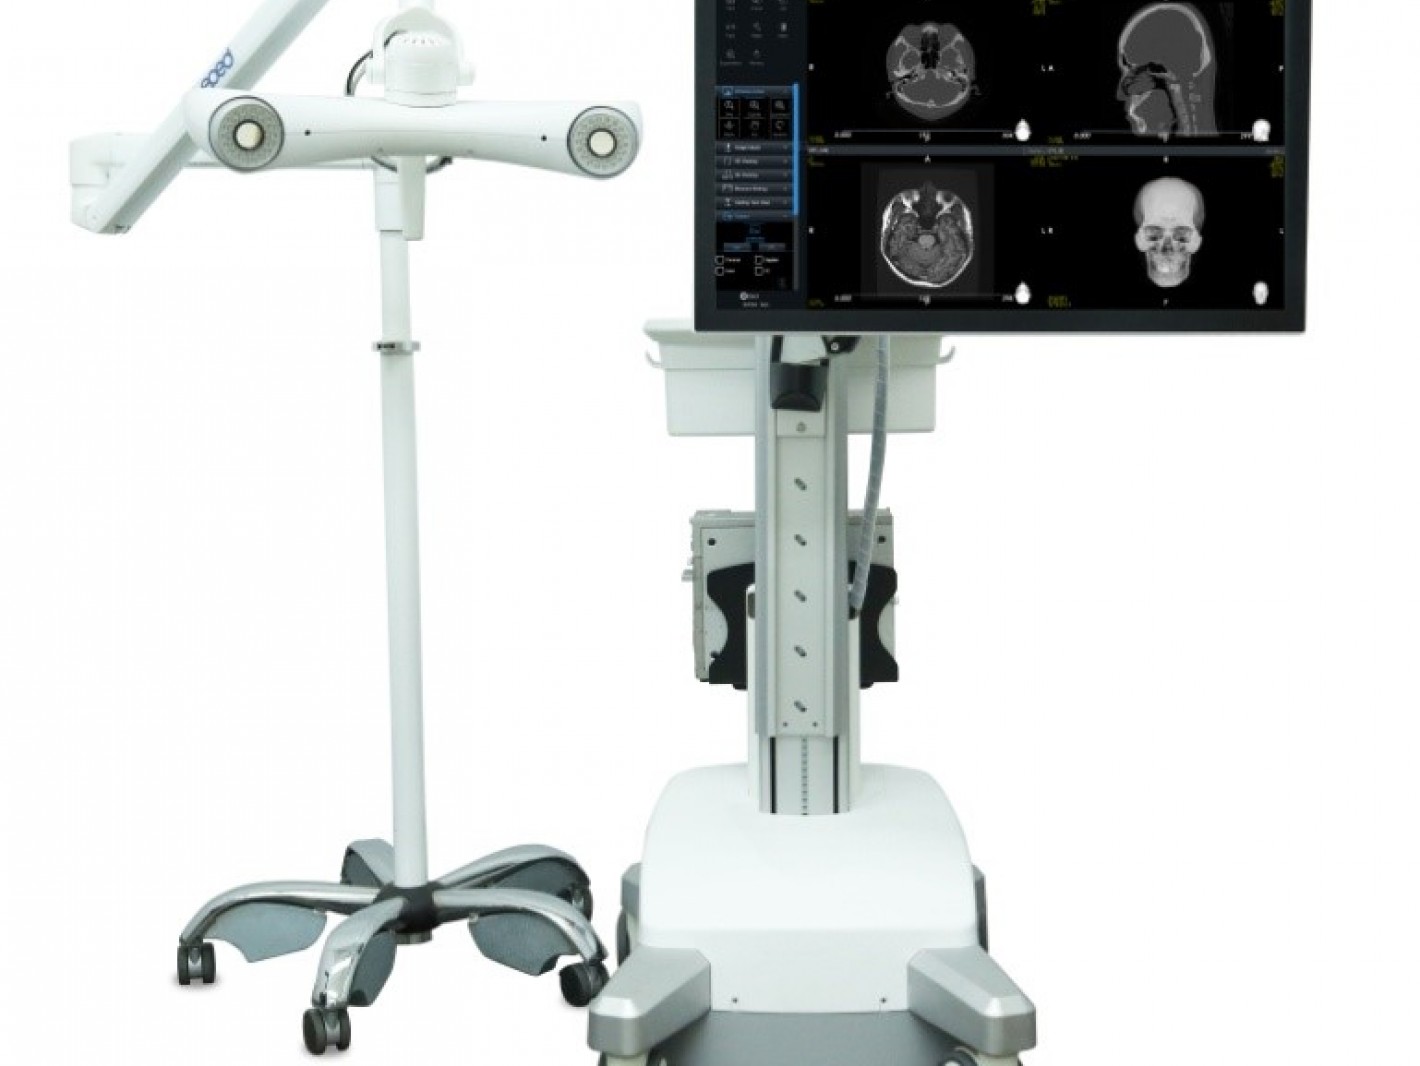 Retina: Stereotactic Surgery Navigation System